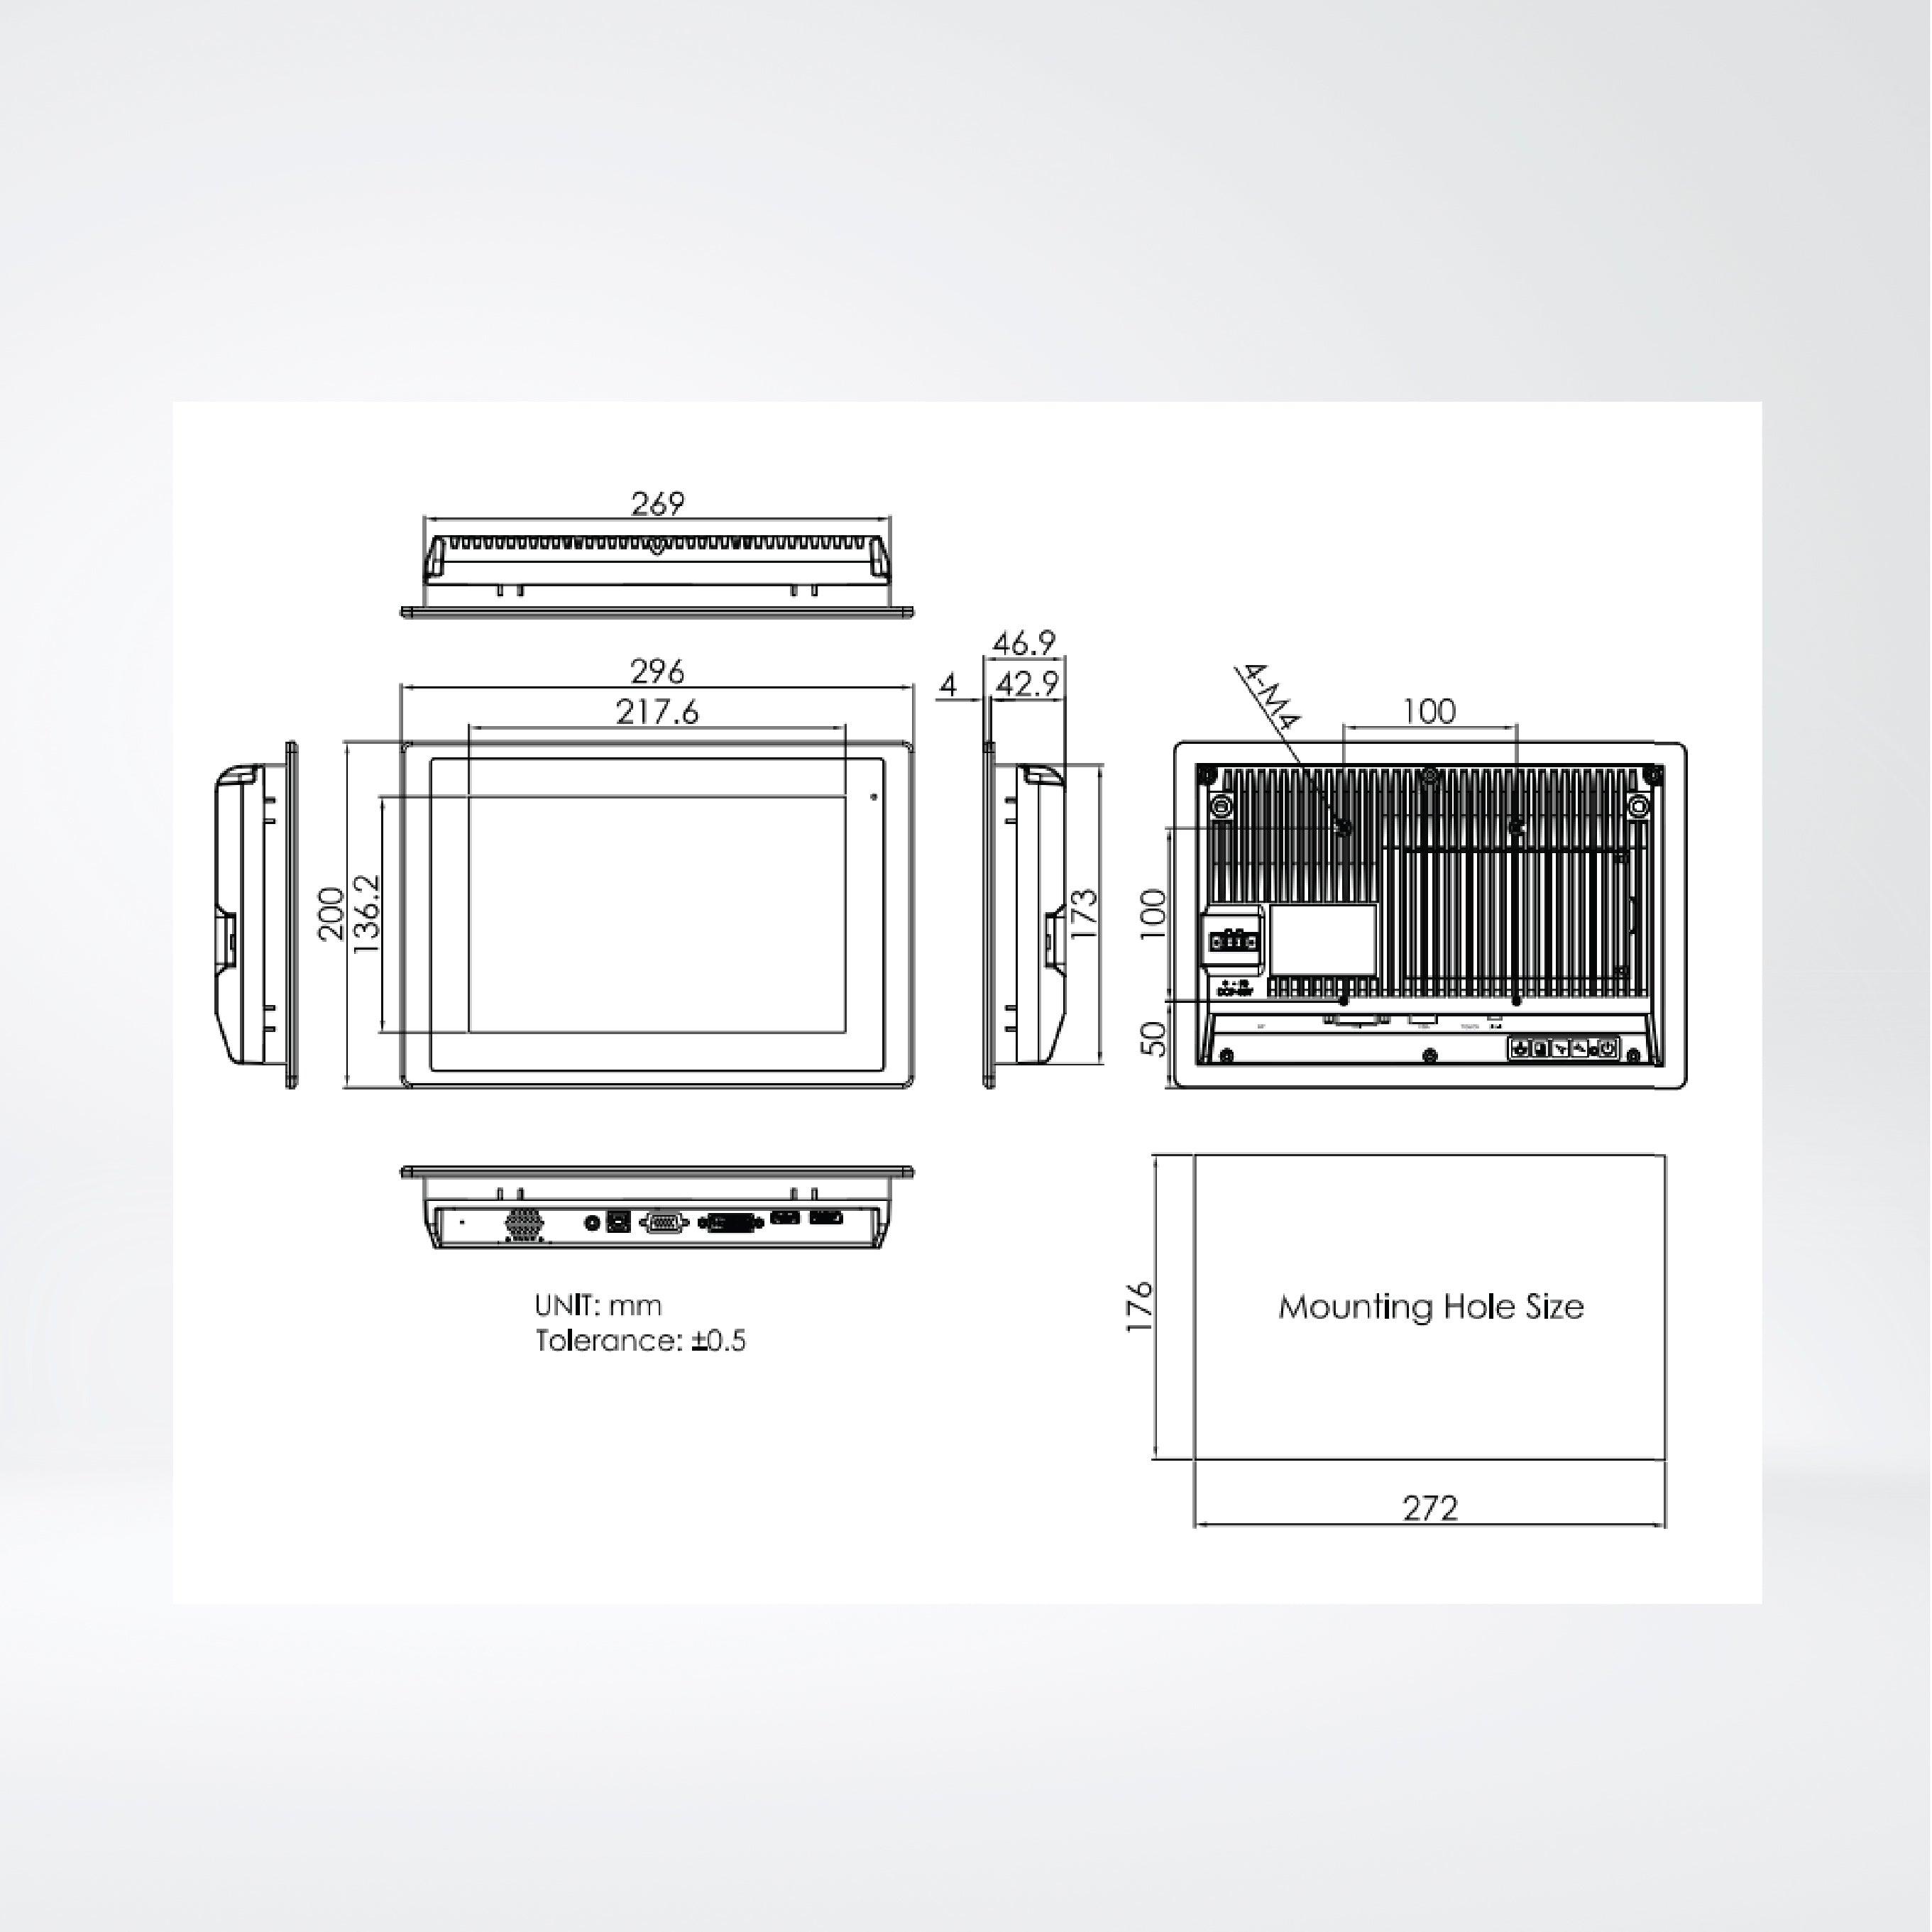 FABS-110R 10.1” Flat Front Panel IP66 Stainless Chassis Display - Riverplus